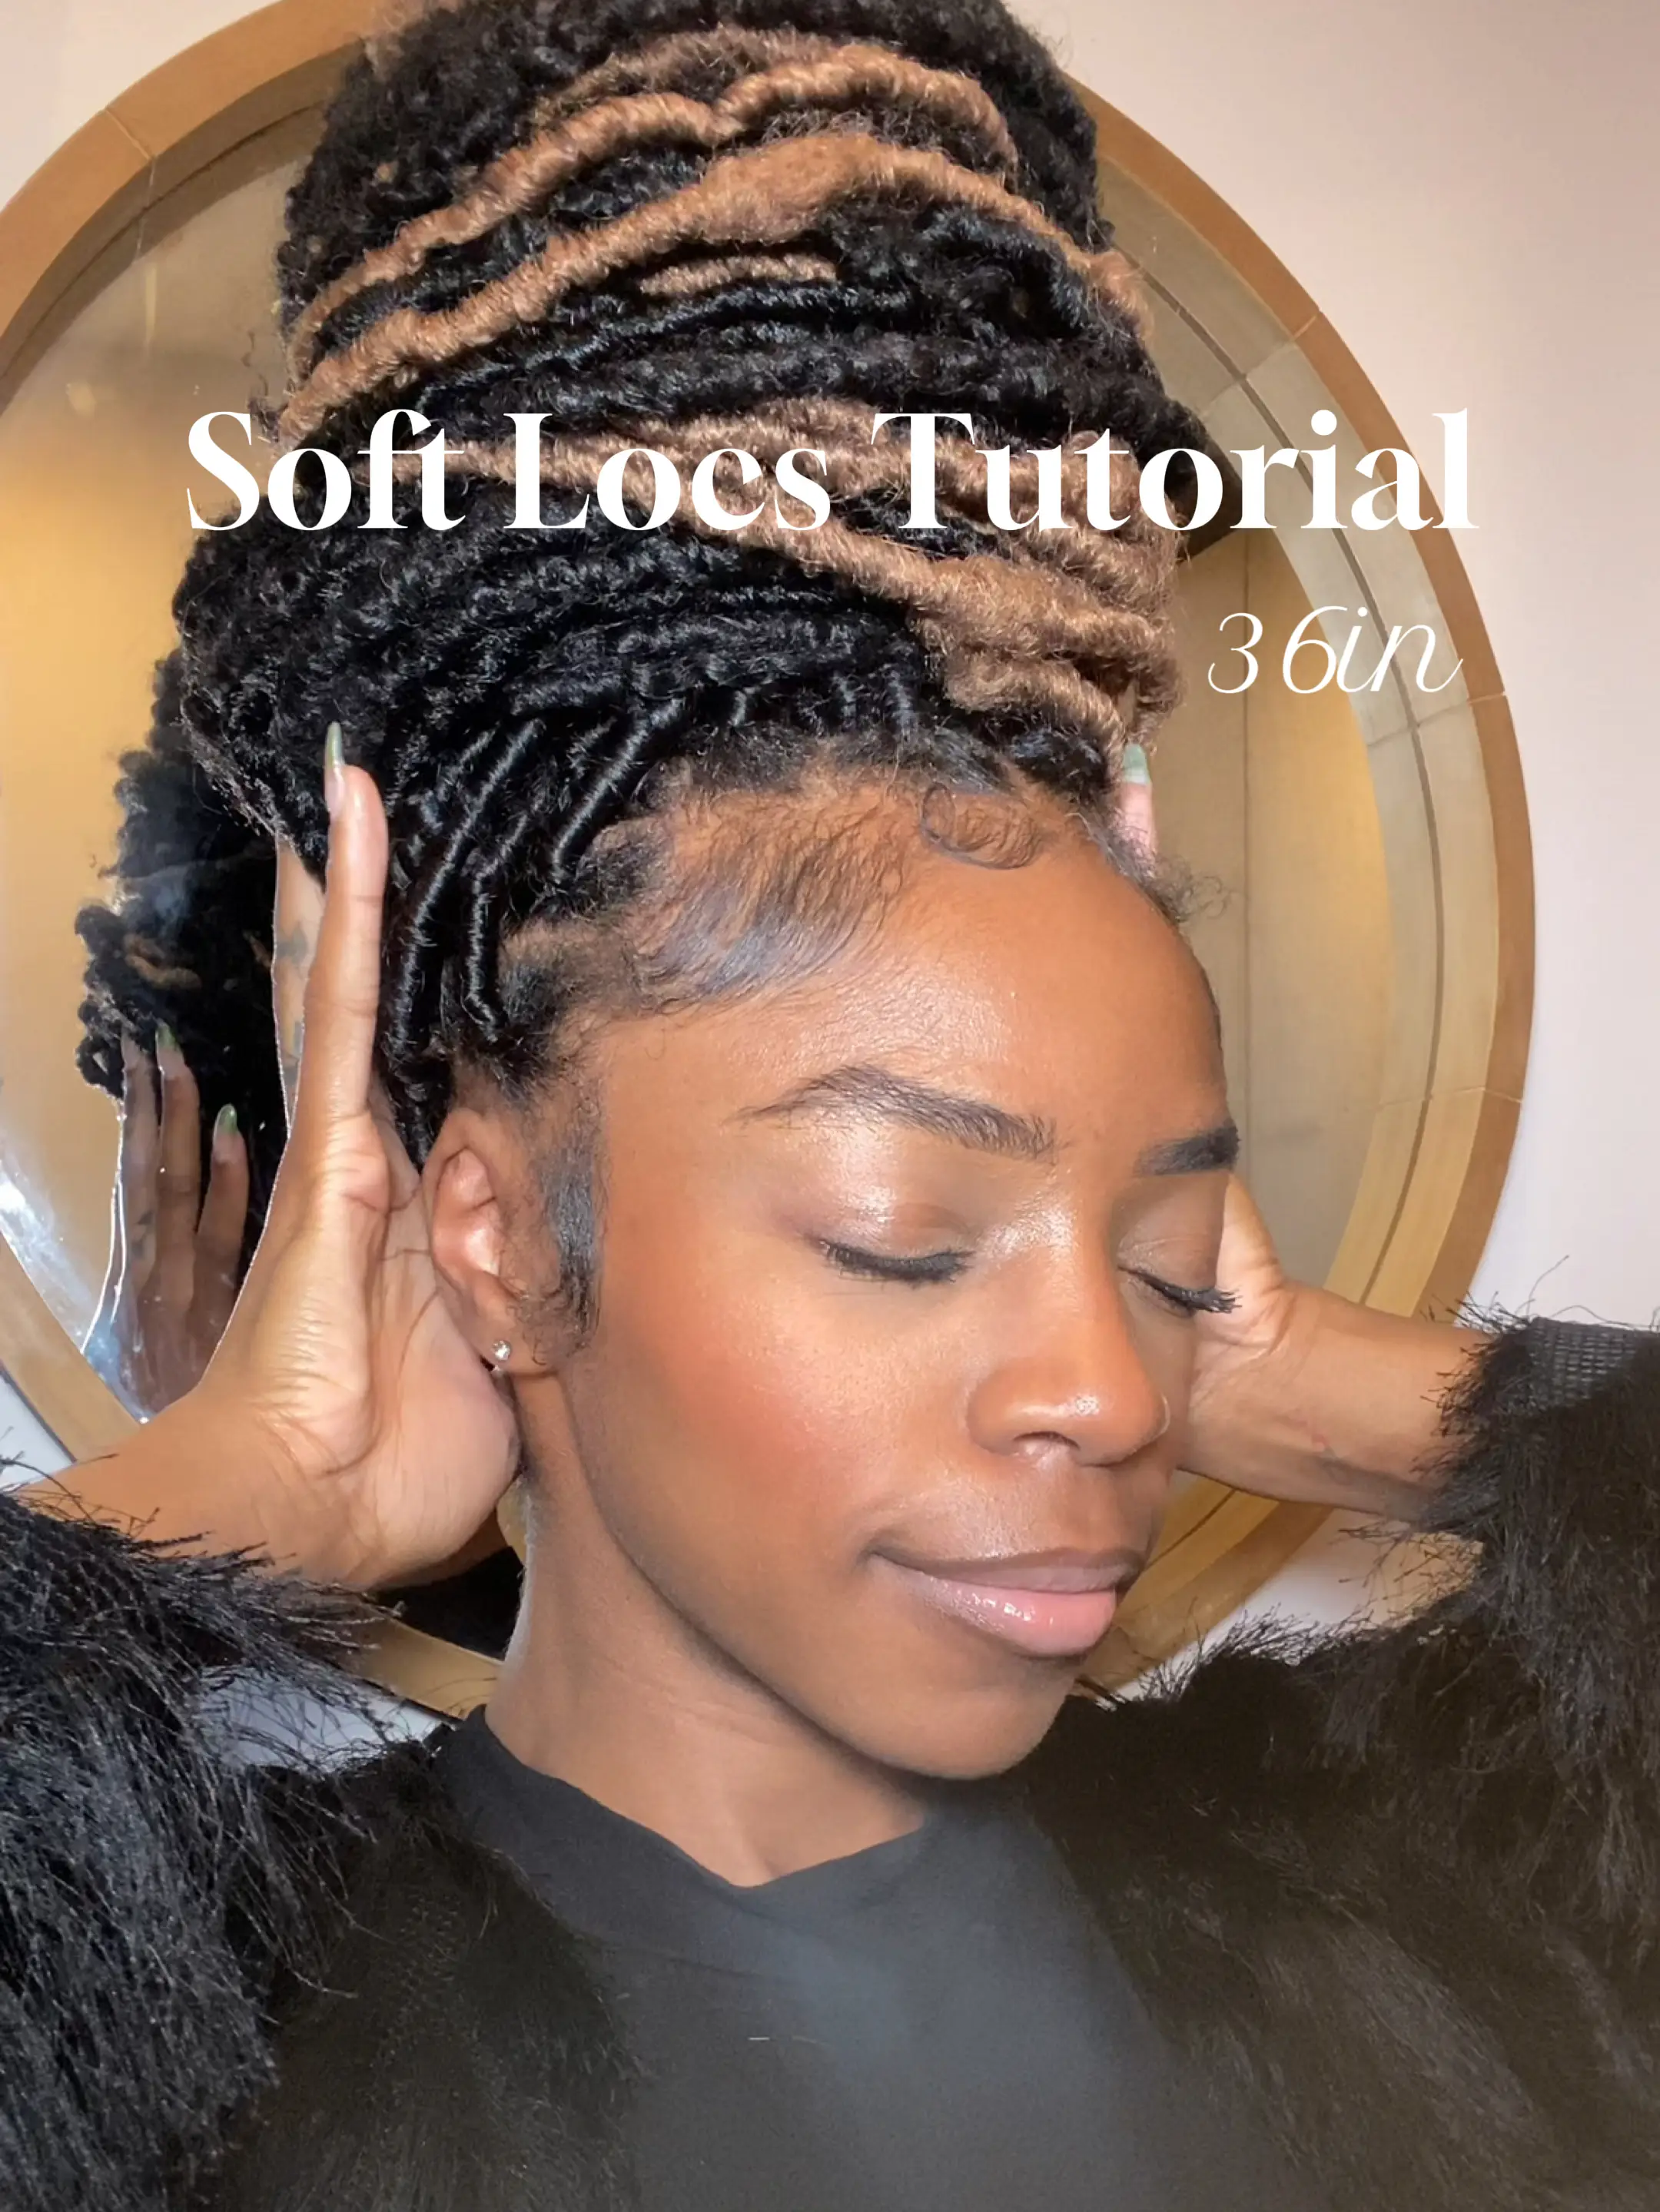 How to Style Faux Locs (5 Styles for Soft Locs, Braids, and Twist